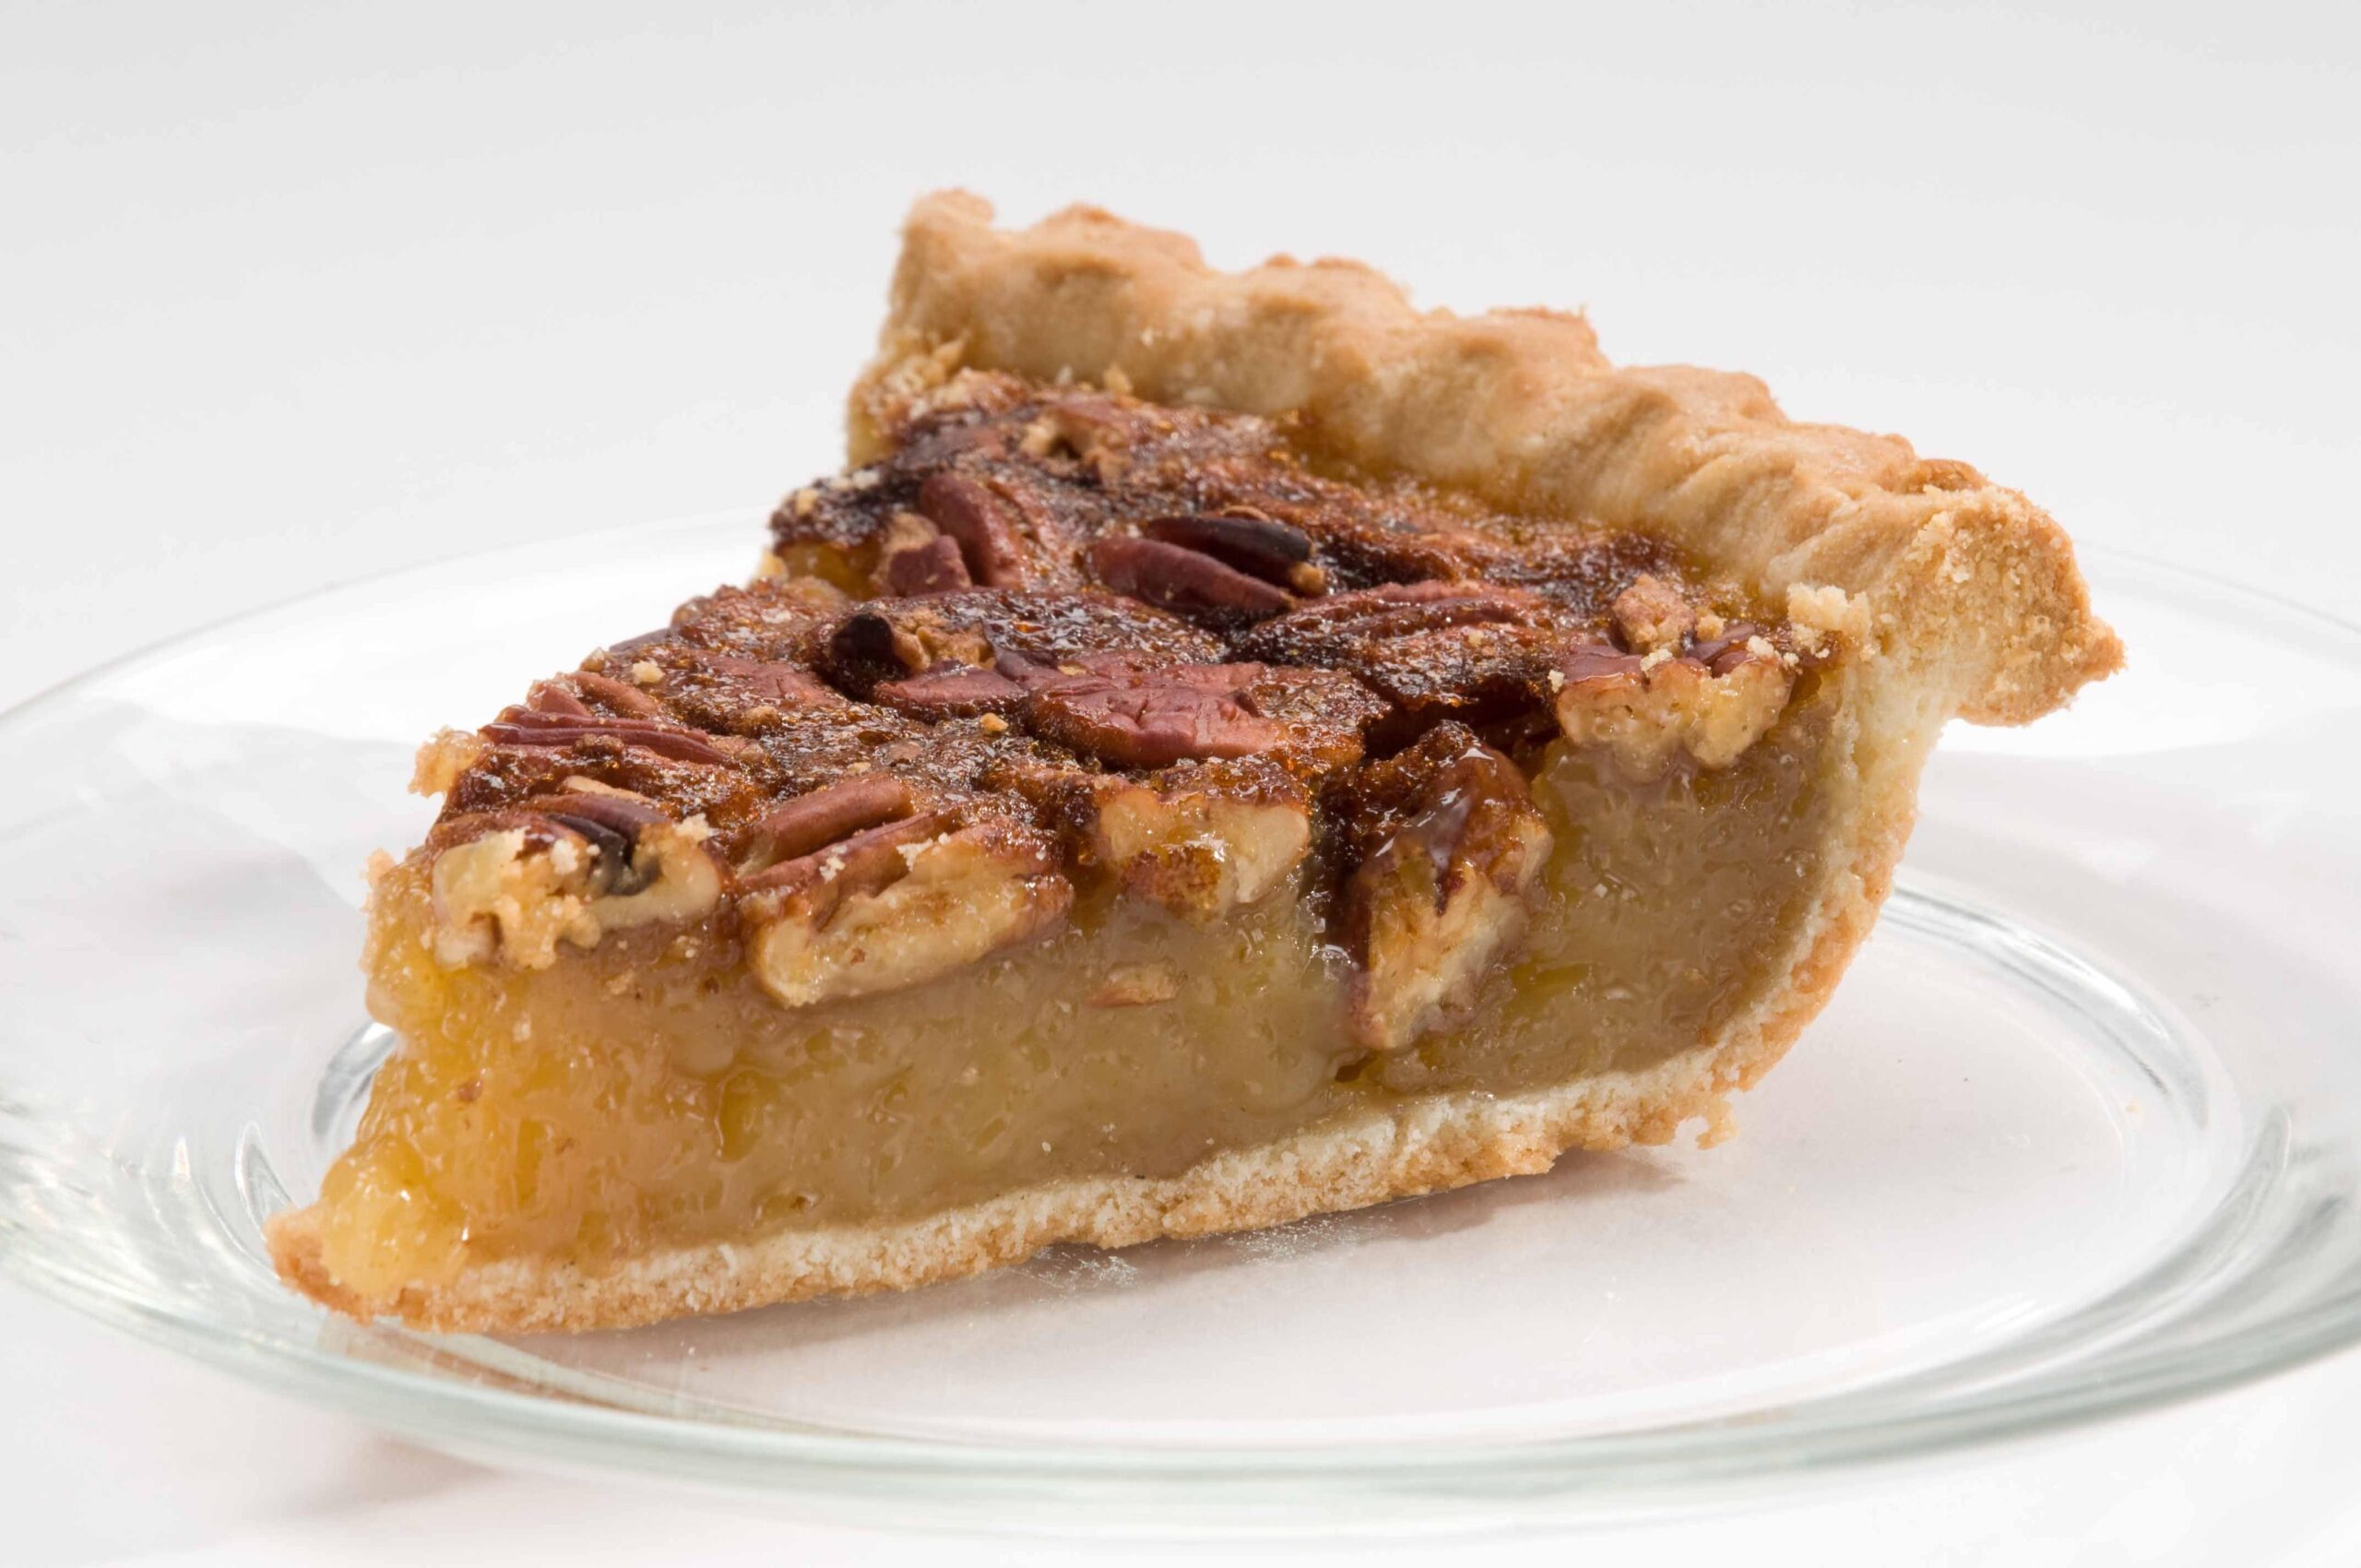  A true comfort food, this pie will leave you feeling warm and fuzzy inside.